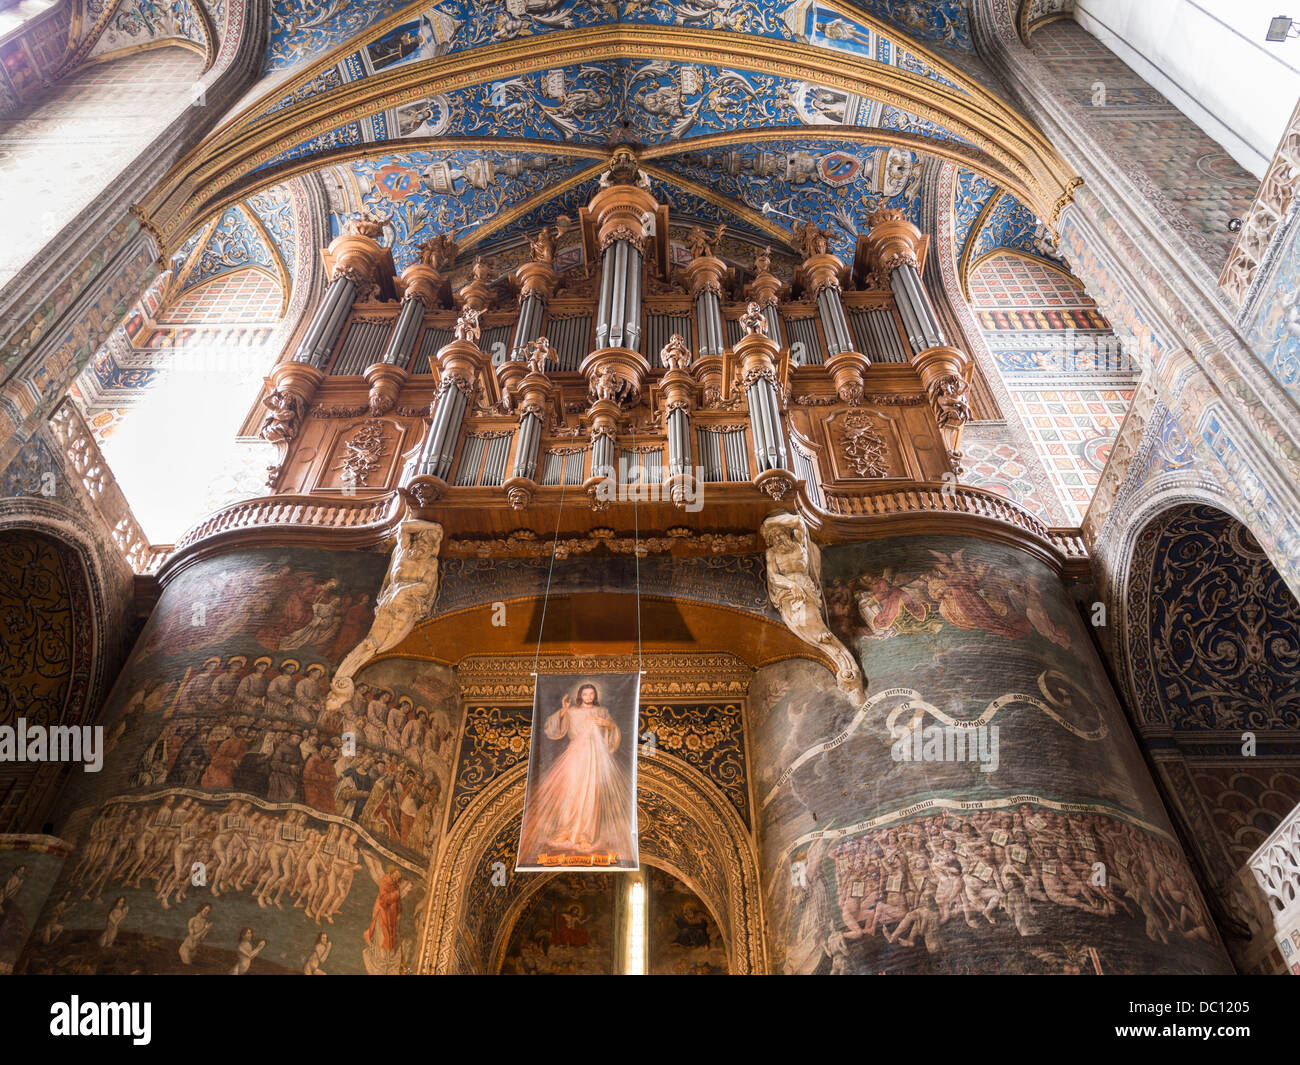 The Last Judgment mural with Organ Pipes. The front of the massive cathedral in Albi with the Last Judgment Stock Photo